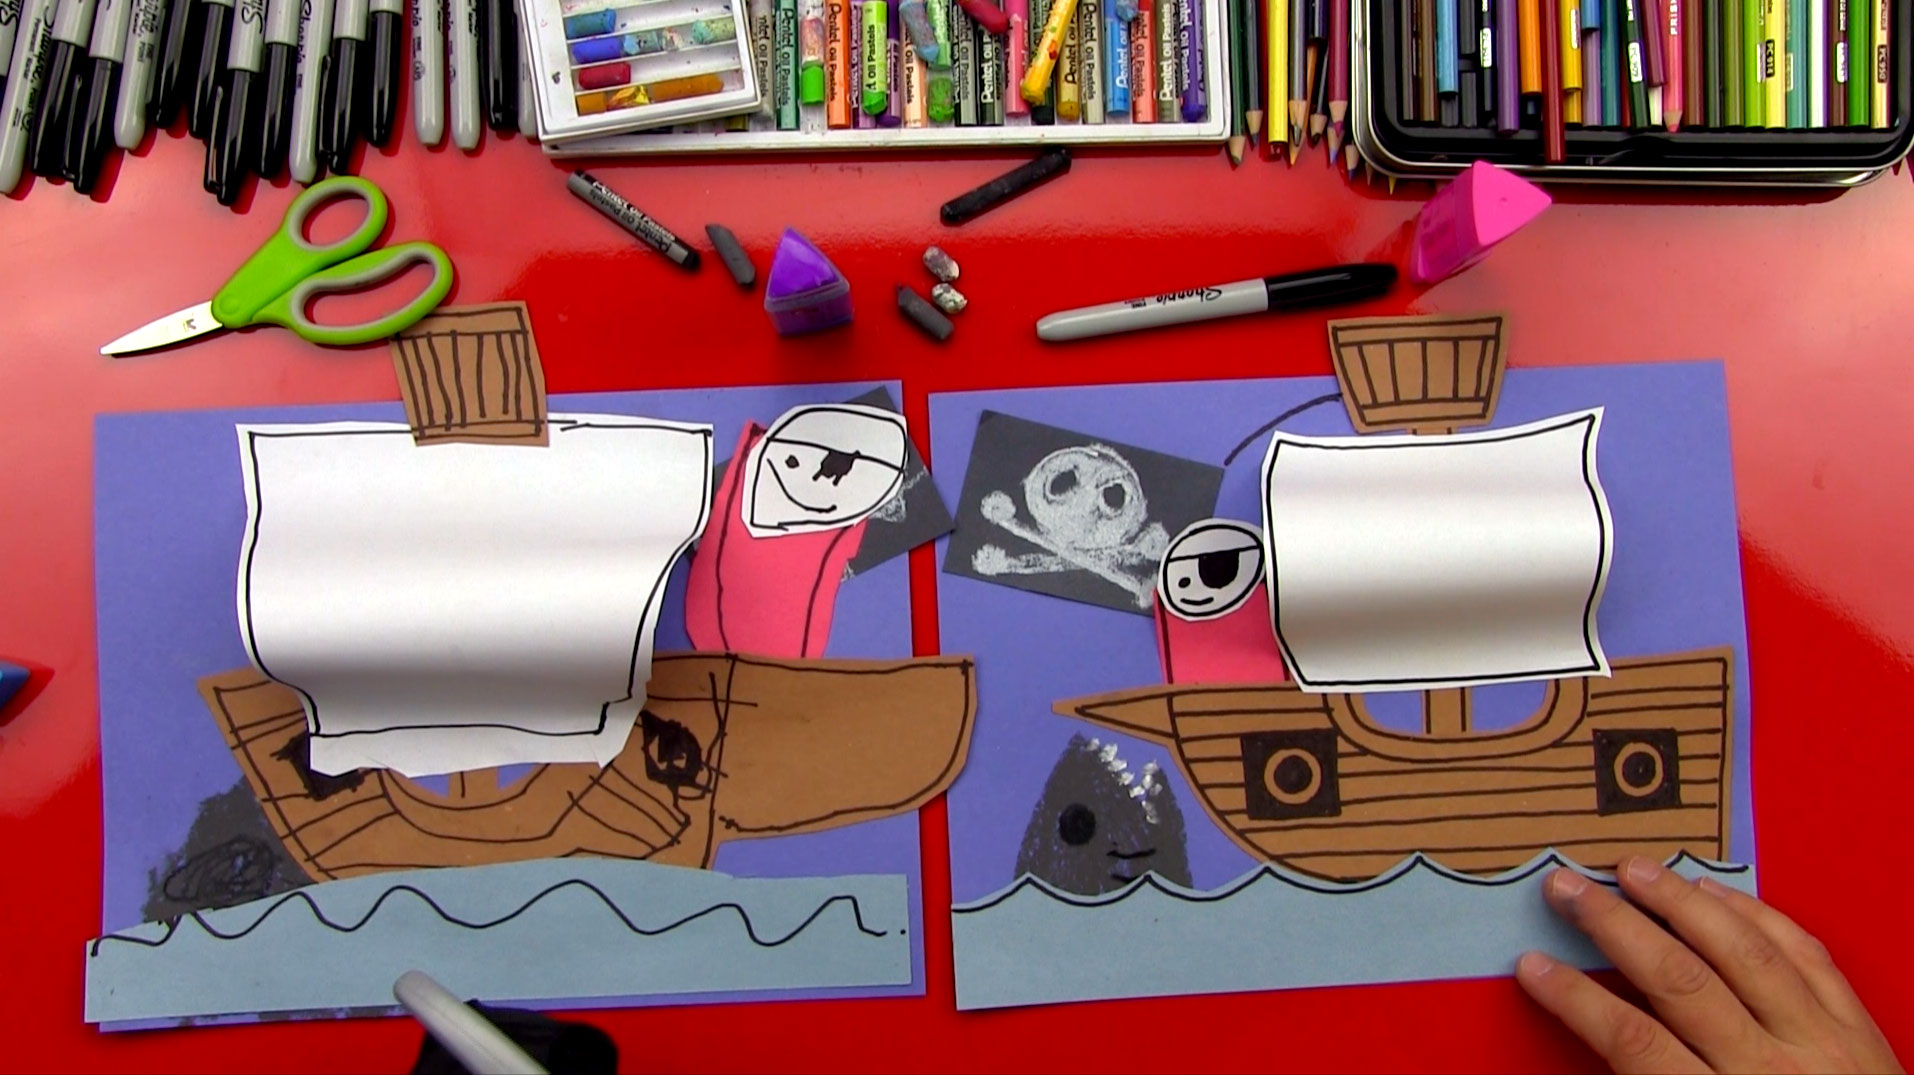 How To Draw A Pirate Ship - Art For Kids Hub